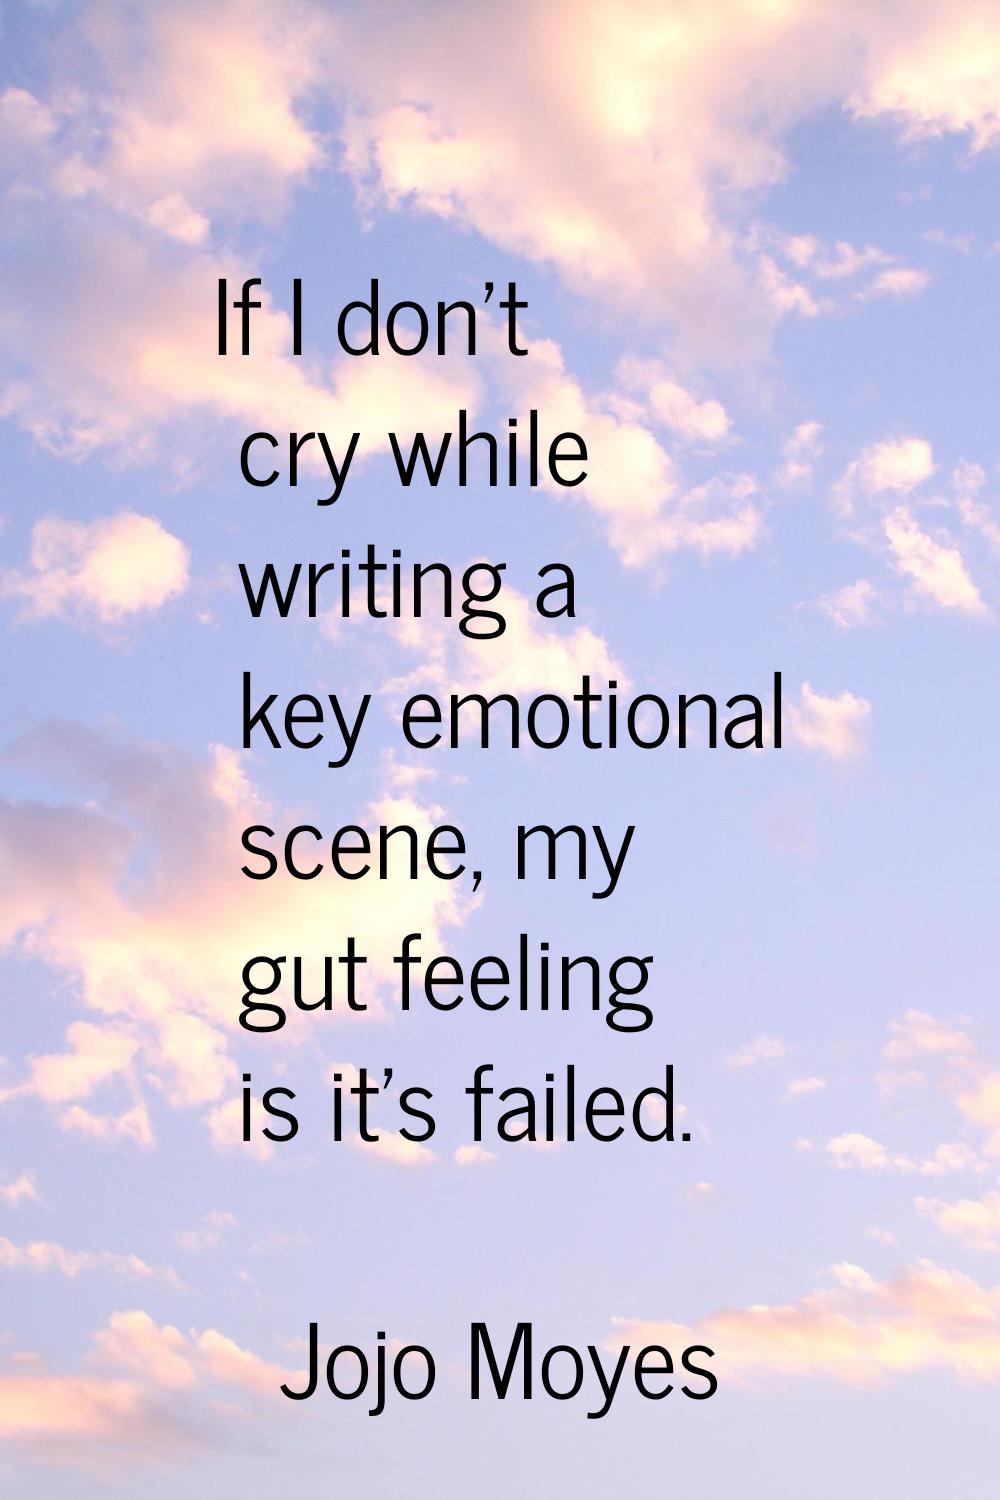 If I don't cry while writing a key emotional scene, my gut feeling is it's failed.